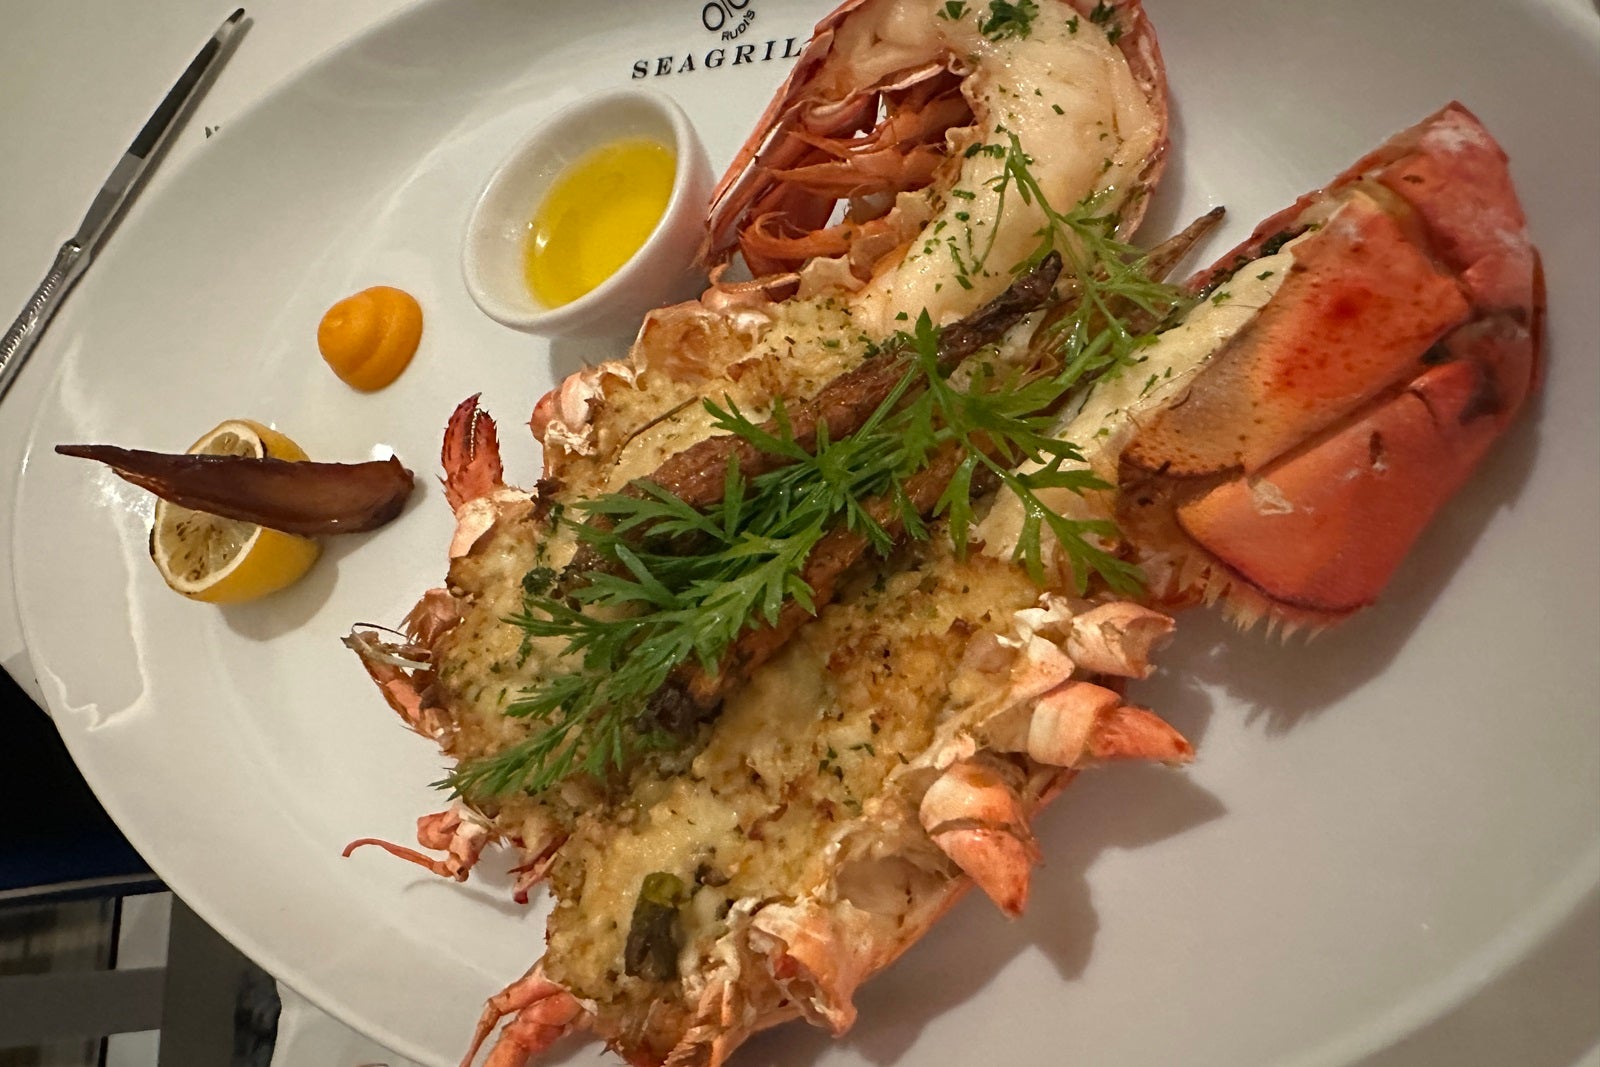 A lobster tail stuffed with crab and topped with herbs on a white plate with a side of butter